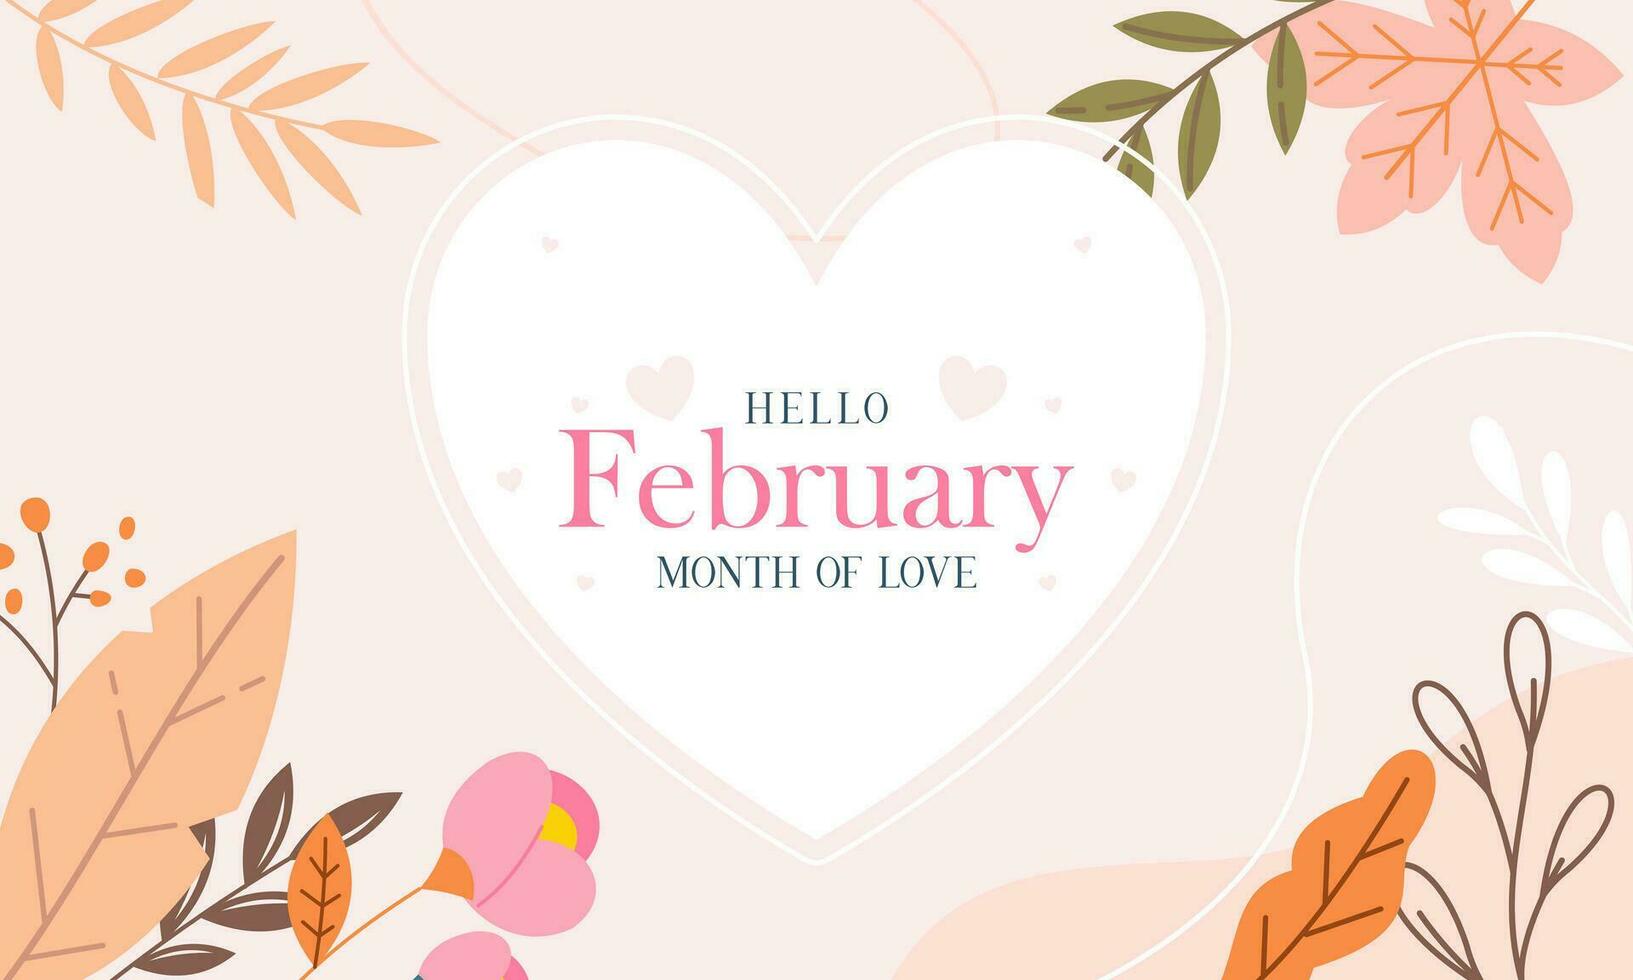 February Month of Love with Flowers Background vector